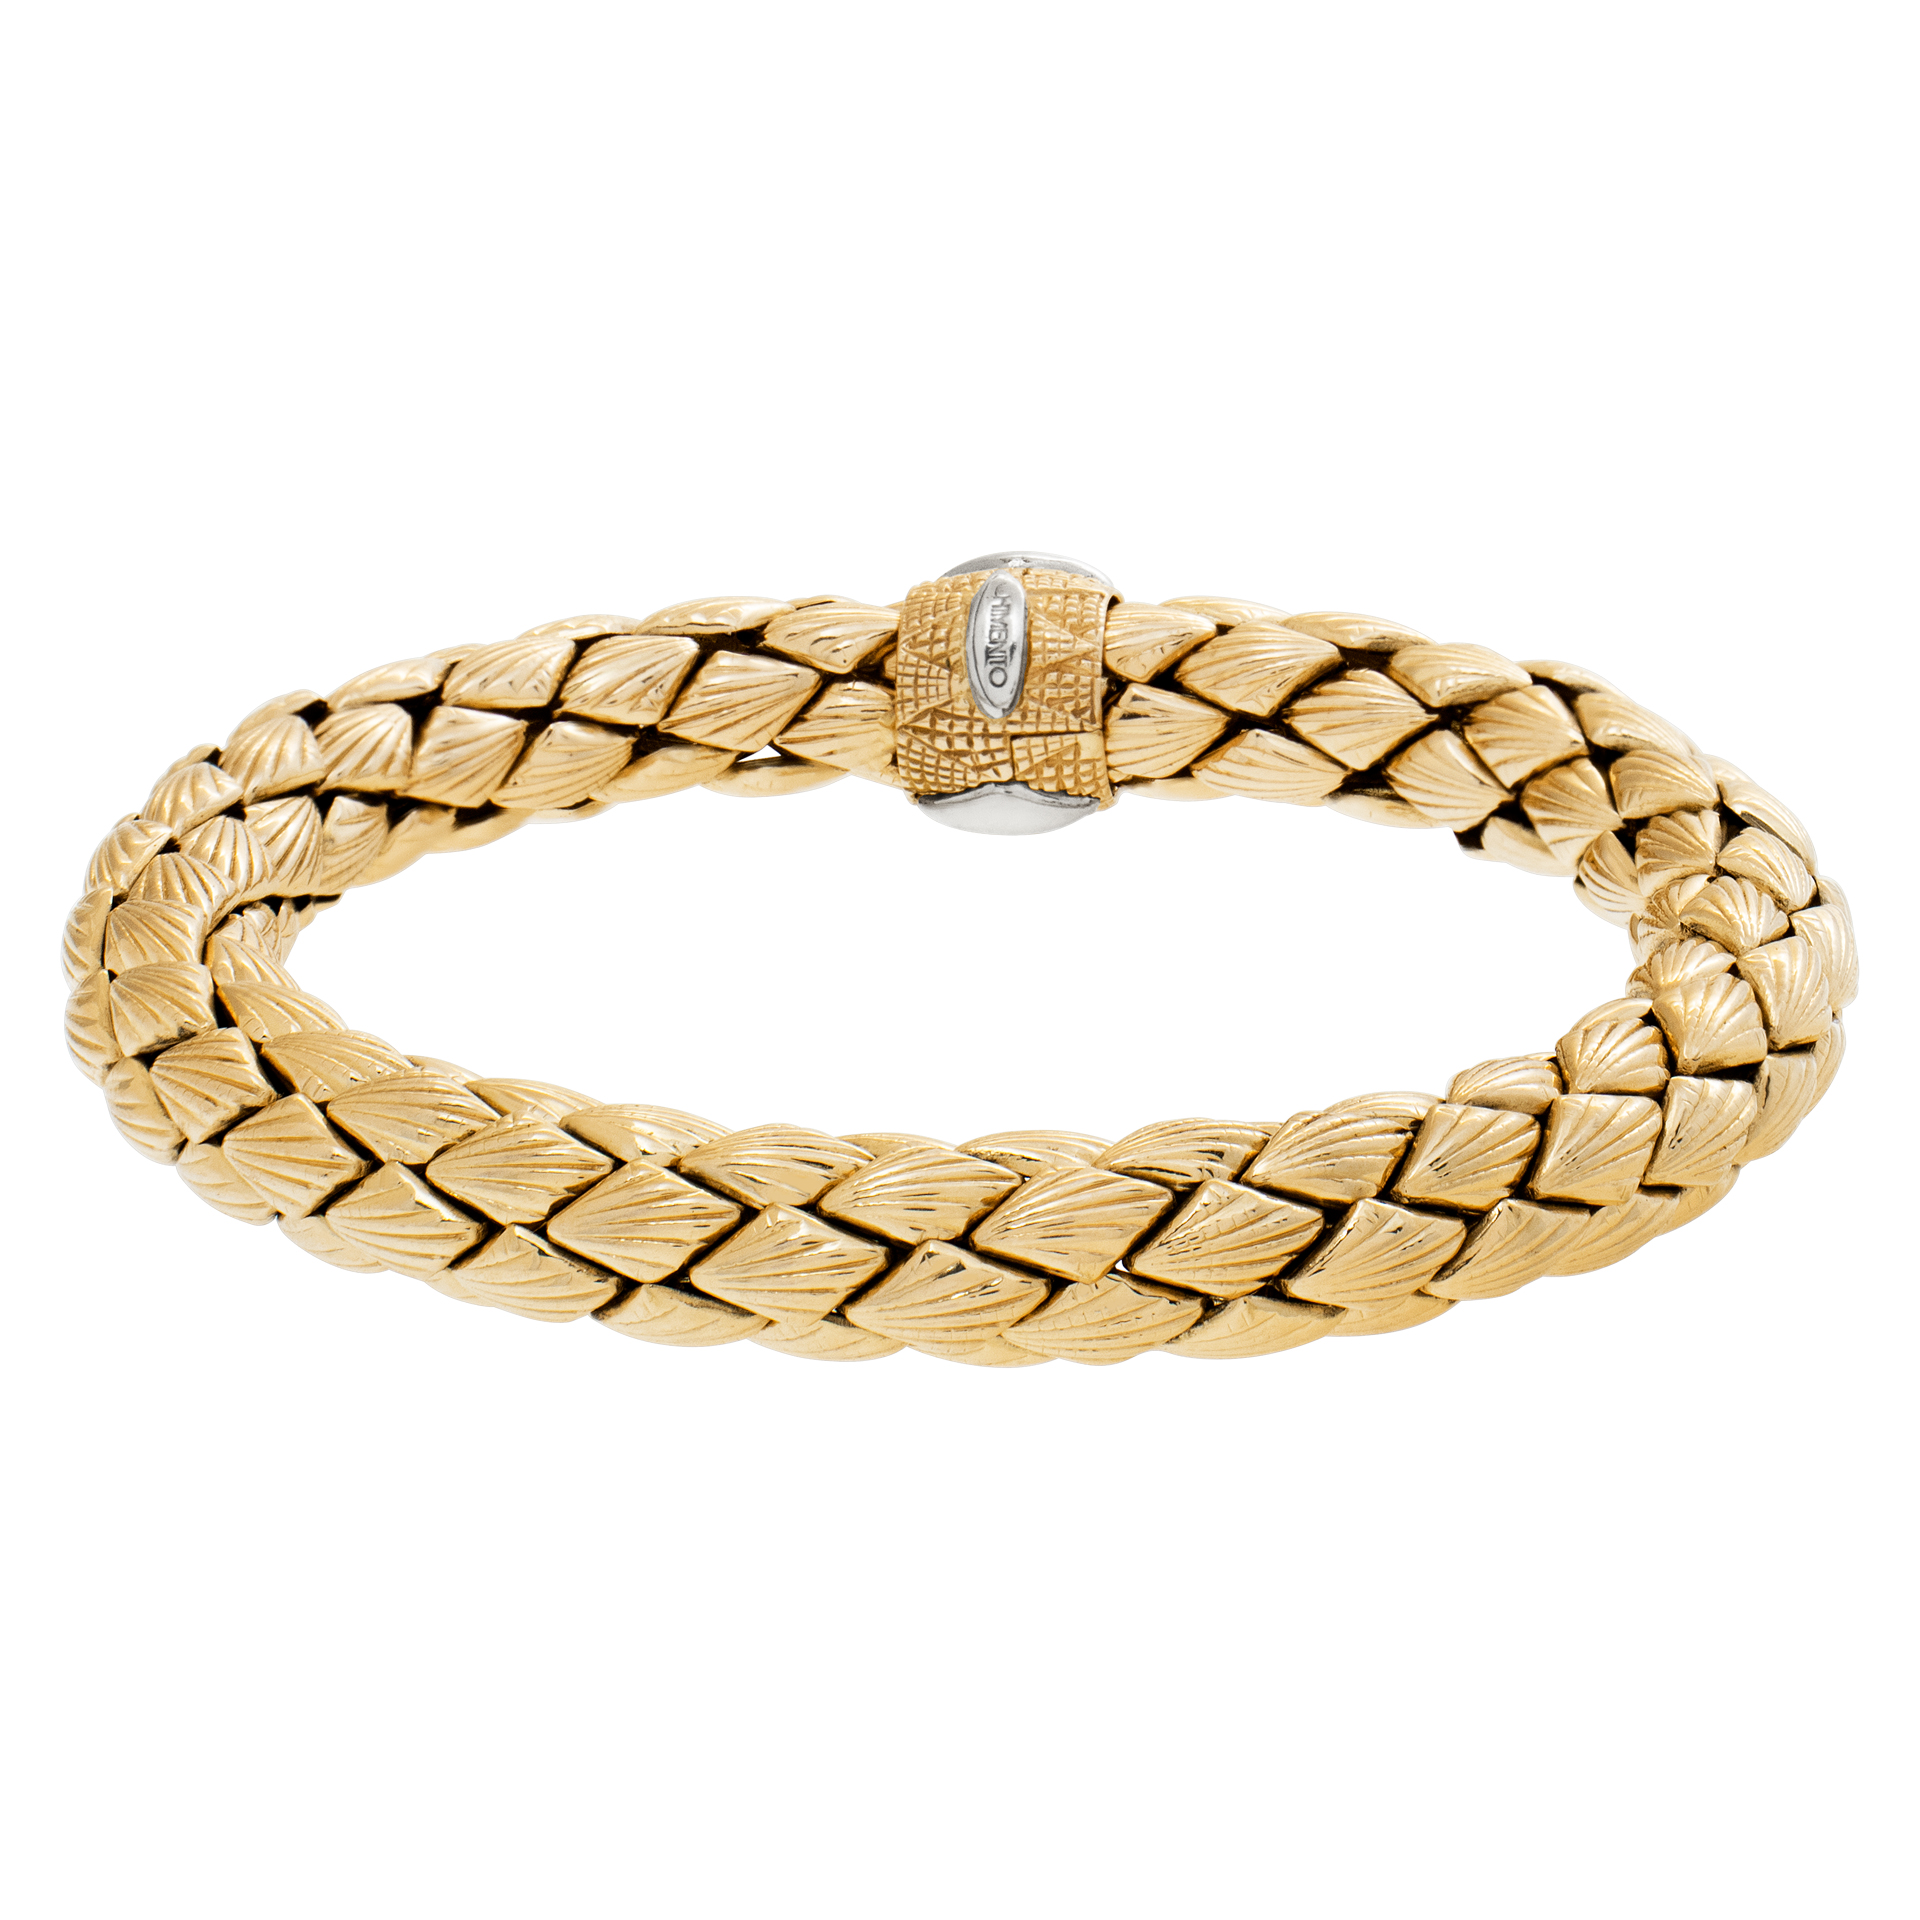 Chimento breaded bracelet in 18k yellow gold with diamond accent on the clasp. image 1